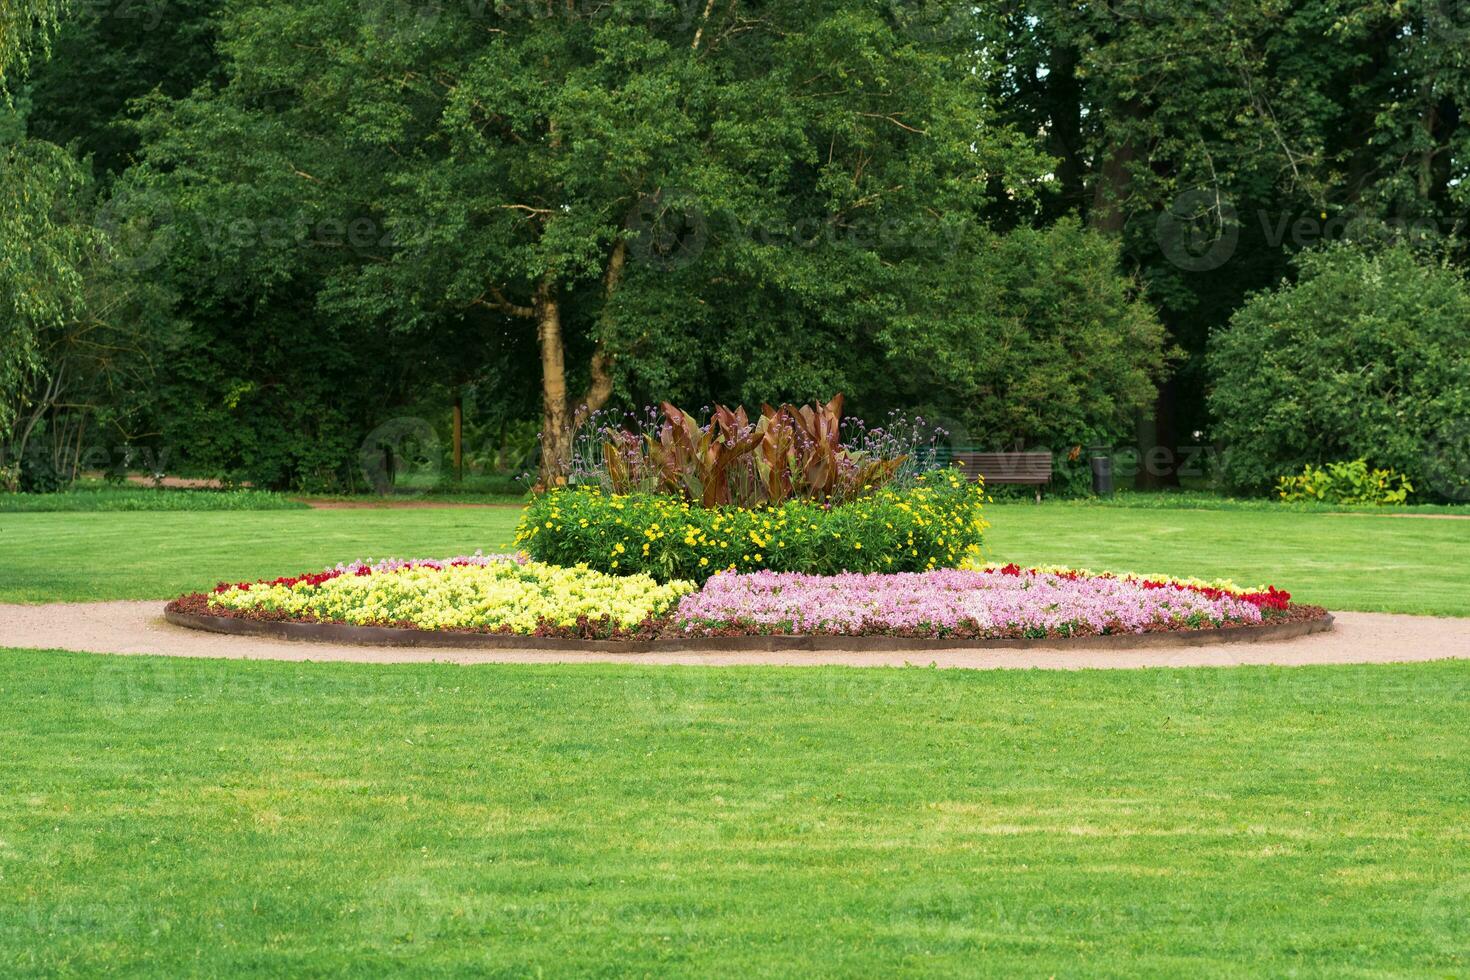 large flower bed in the middle of a lawn in a park photo